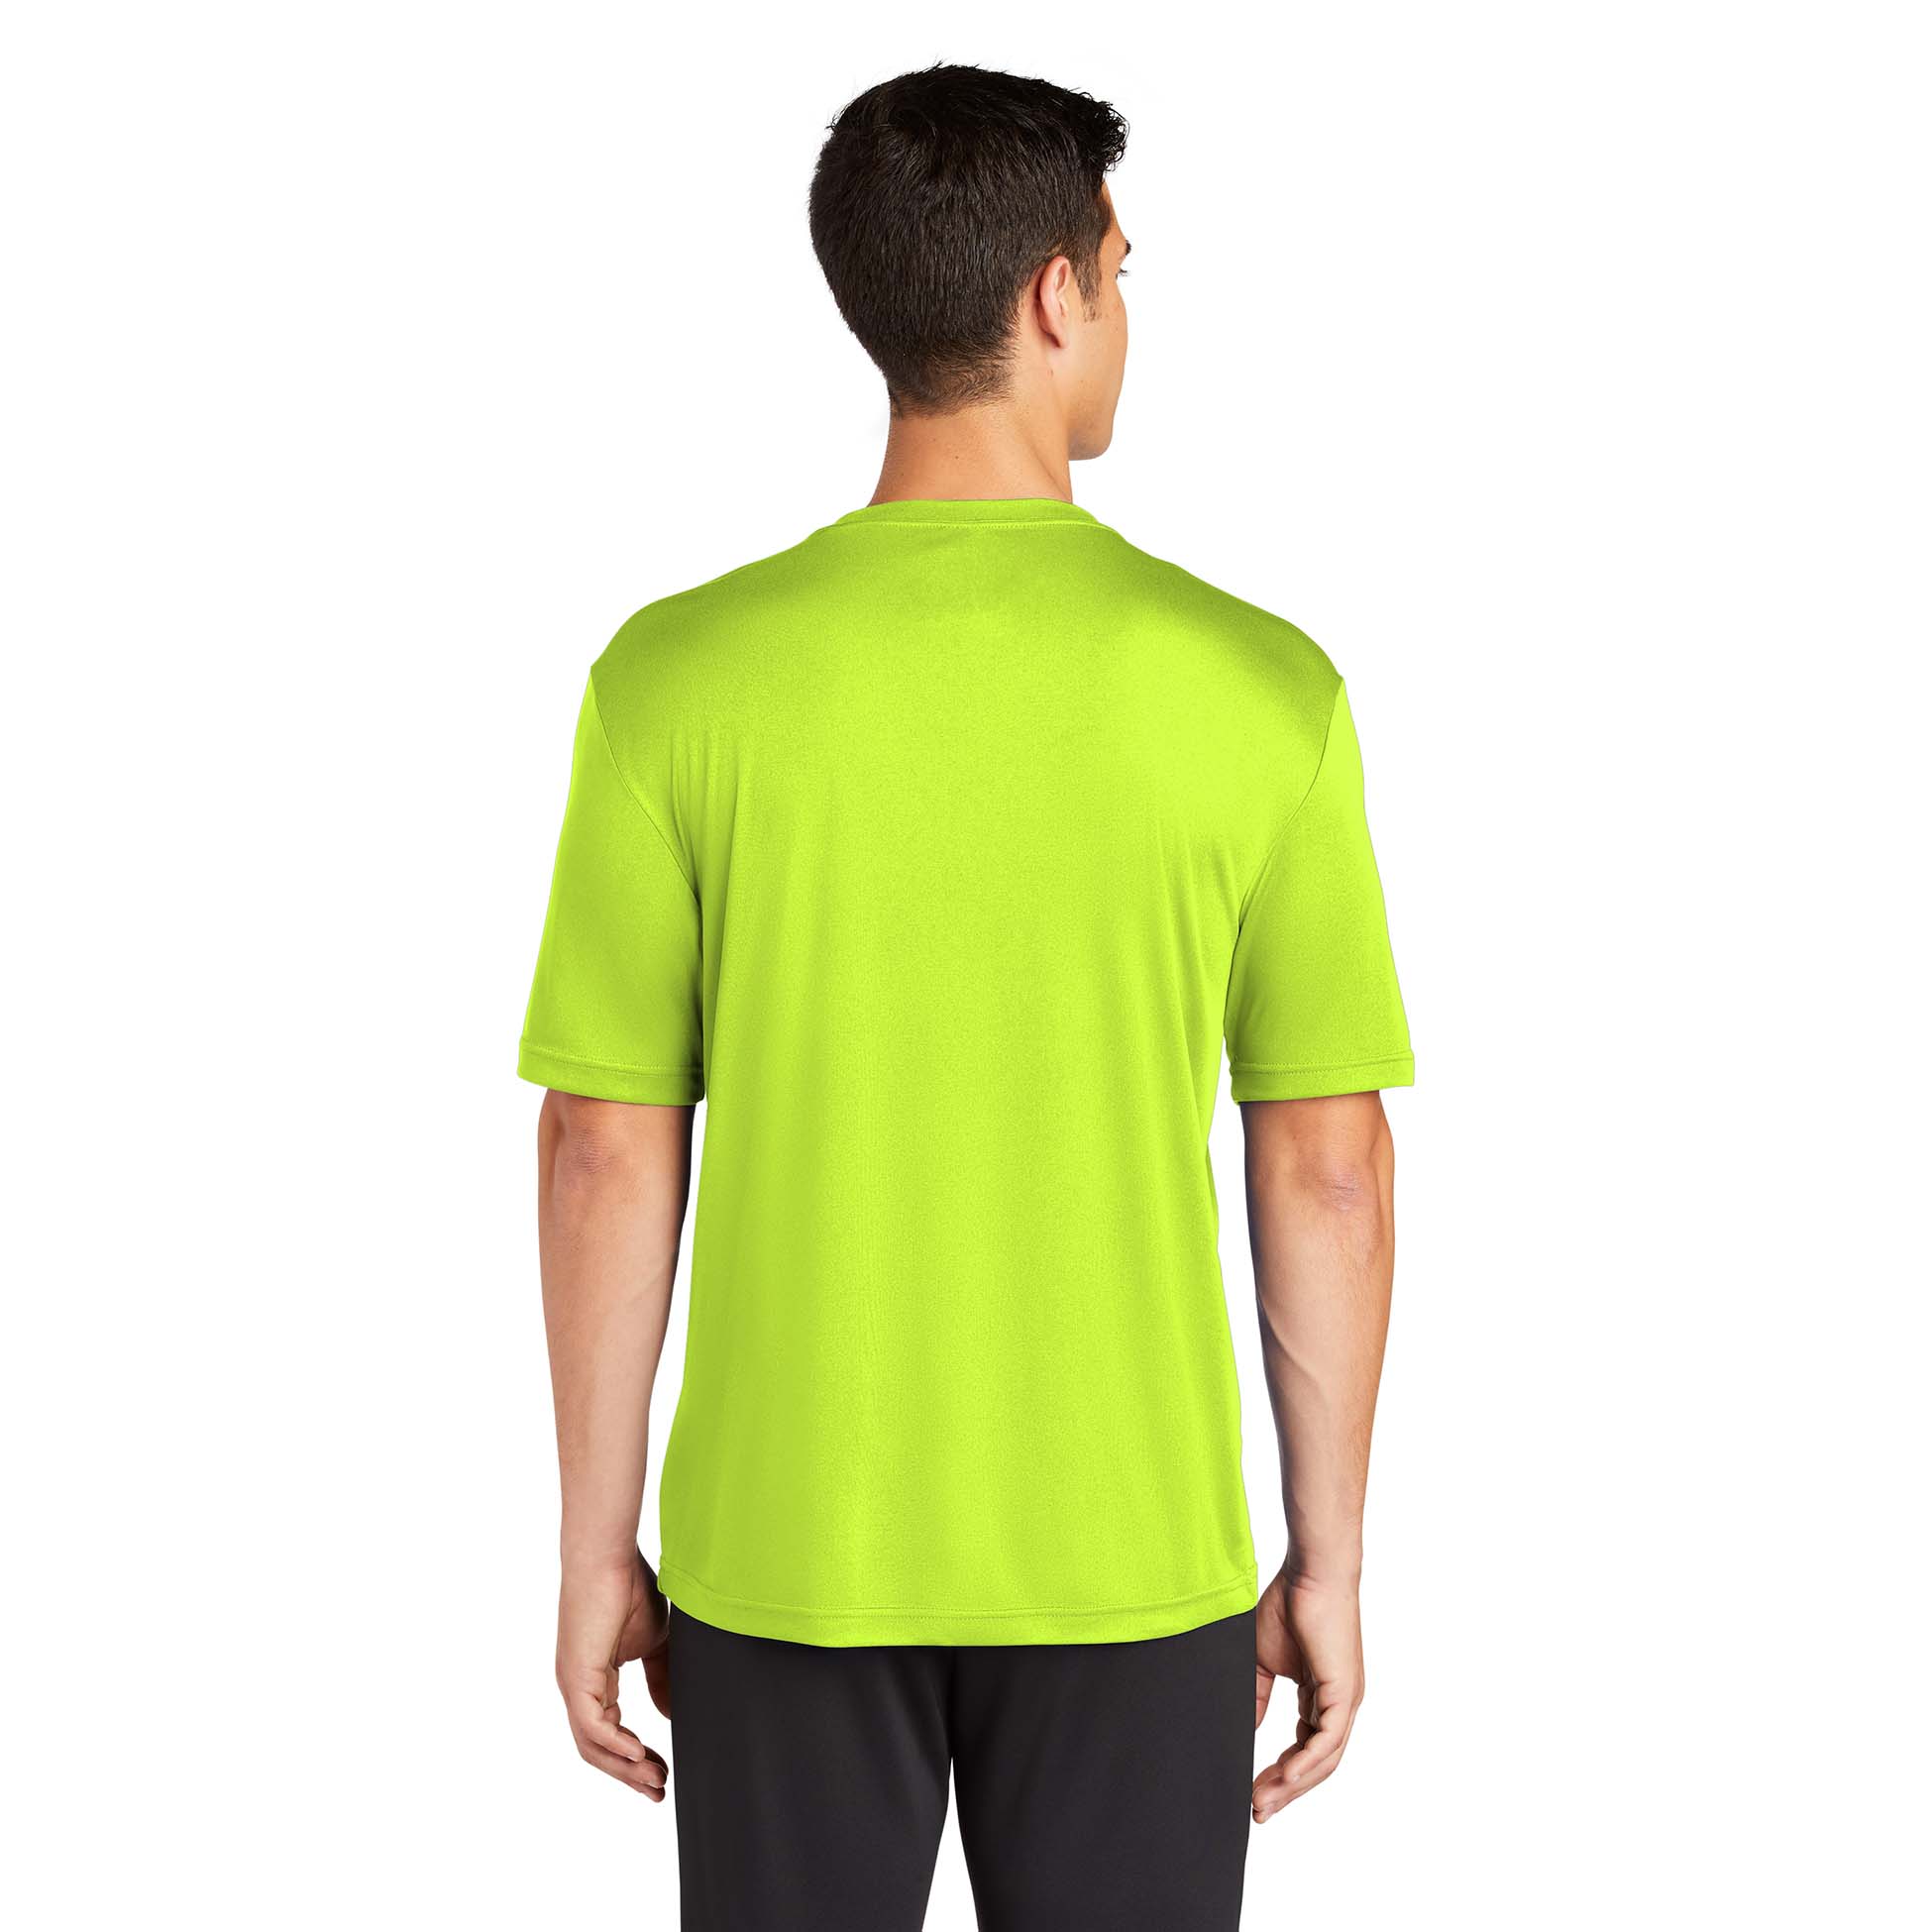 2xl New Neon Yellow Safety Work Play Athletic Brand T Shirt - galaxy adidas t shirt roblox off 71 free shipping